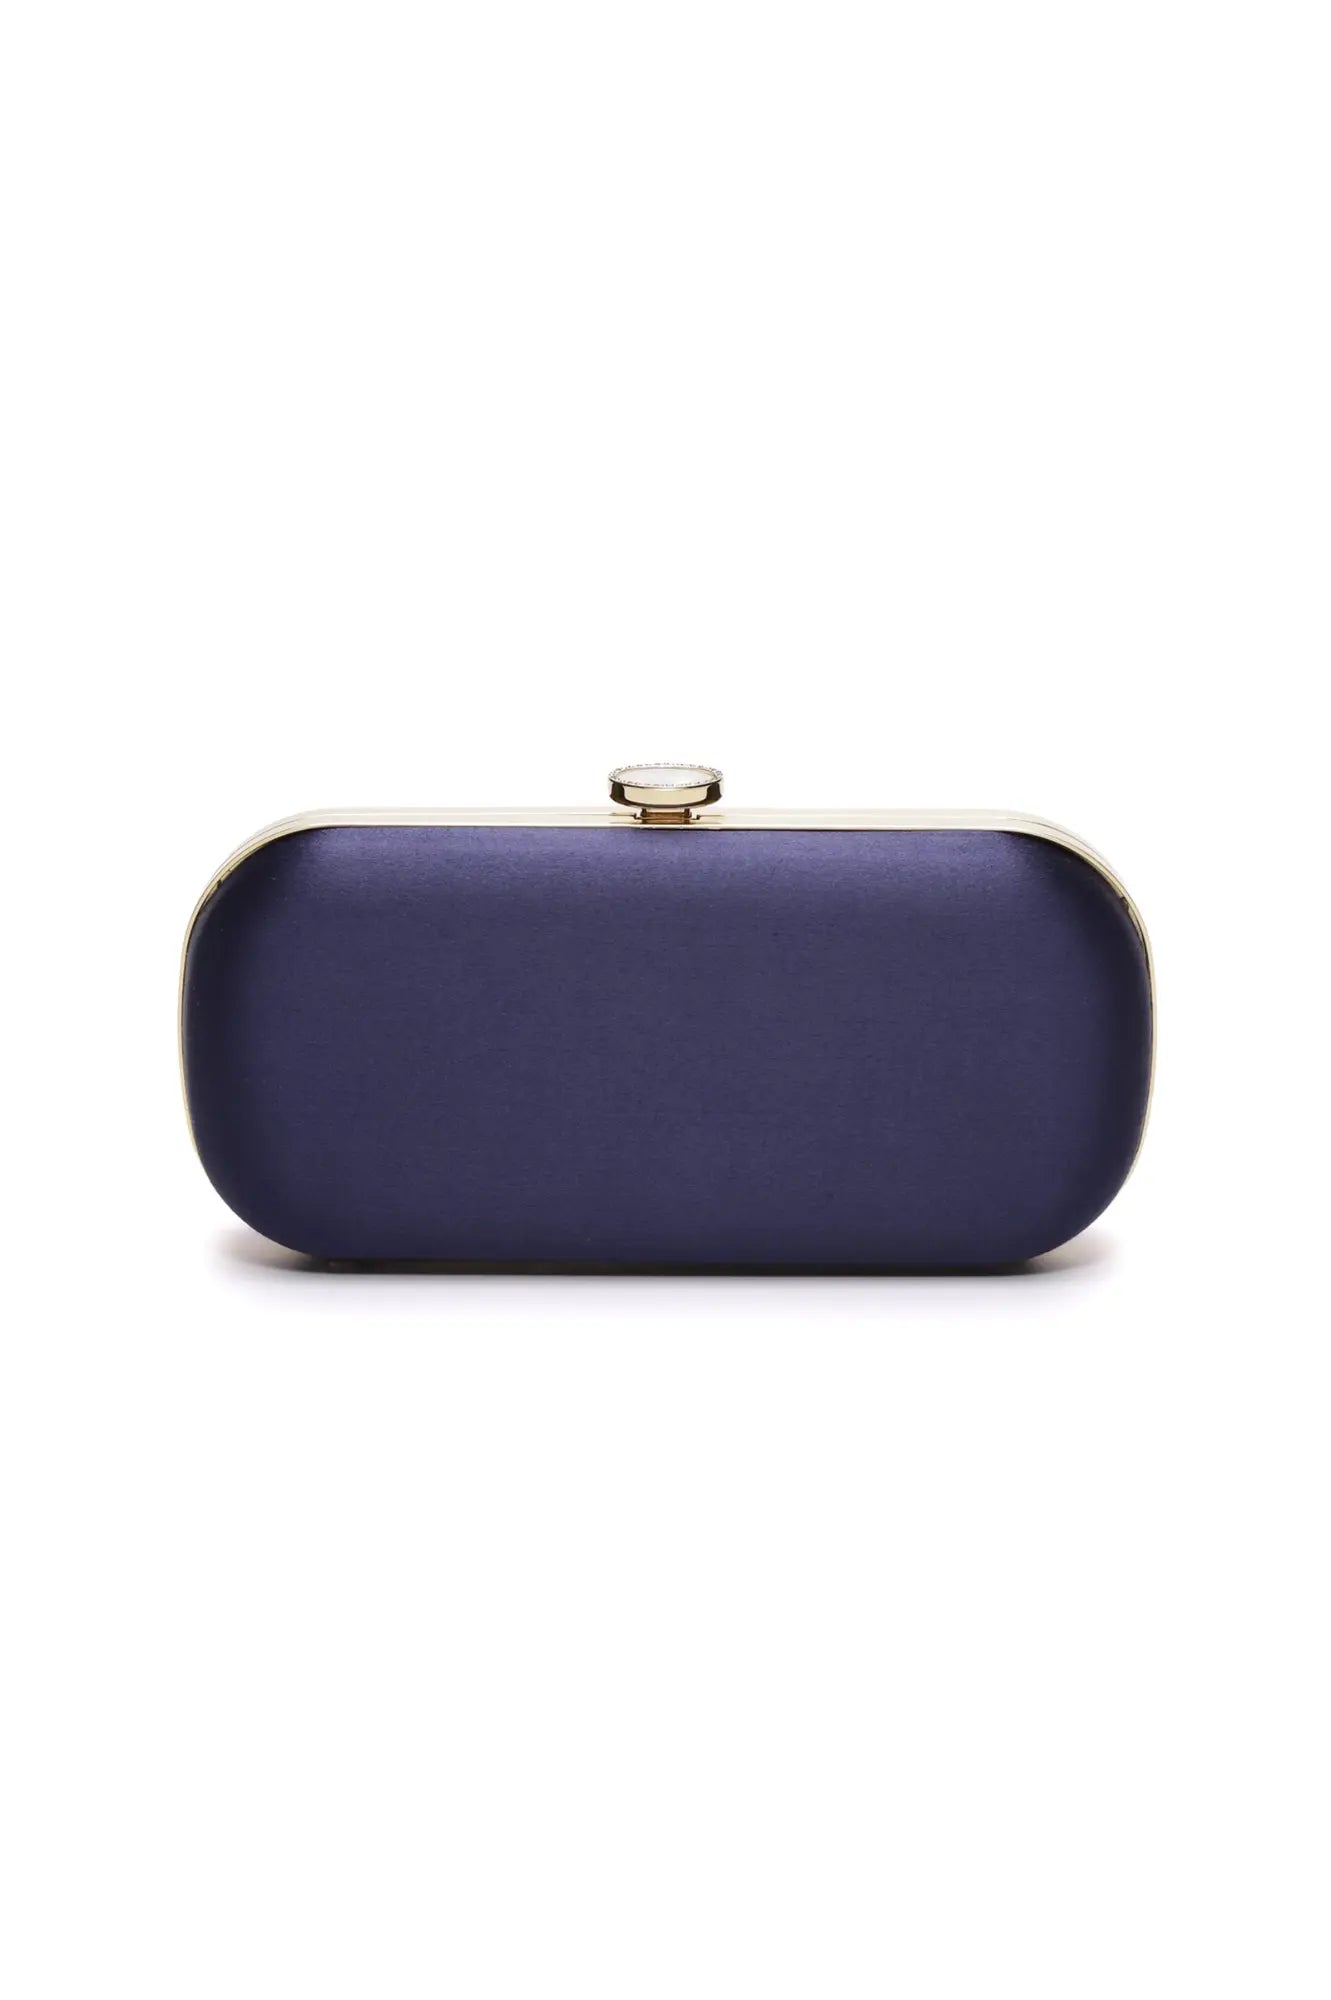 The Bella Rosa Collection Bella Clutch Navy Blue Grande Isolated on a White Background.